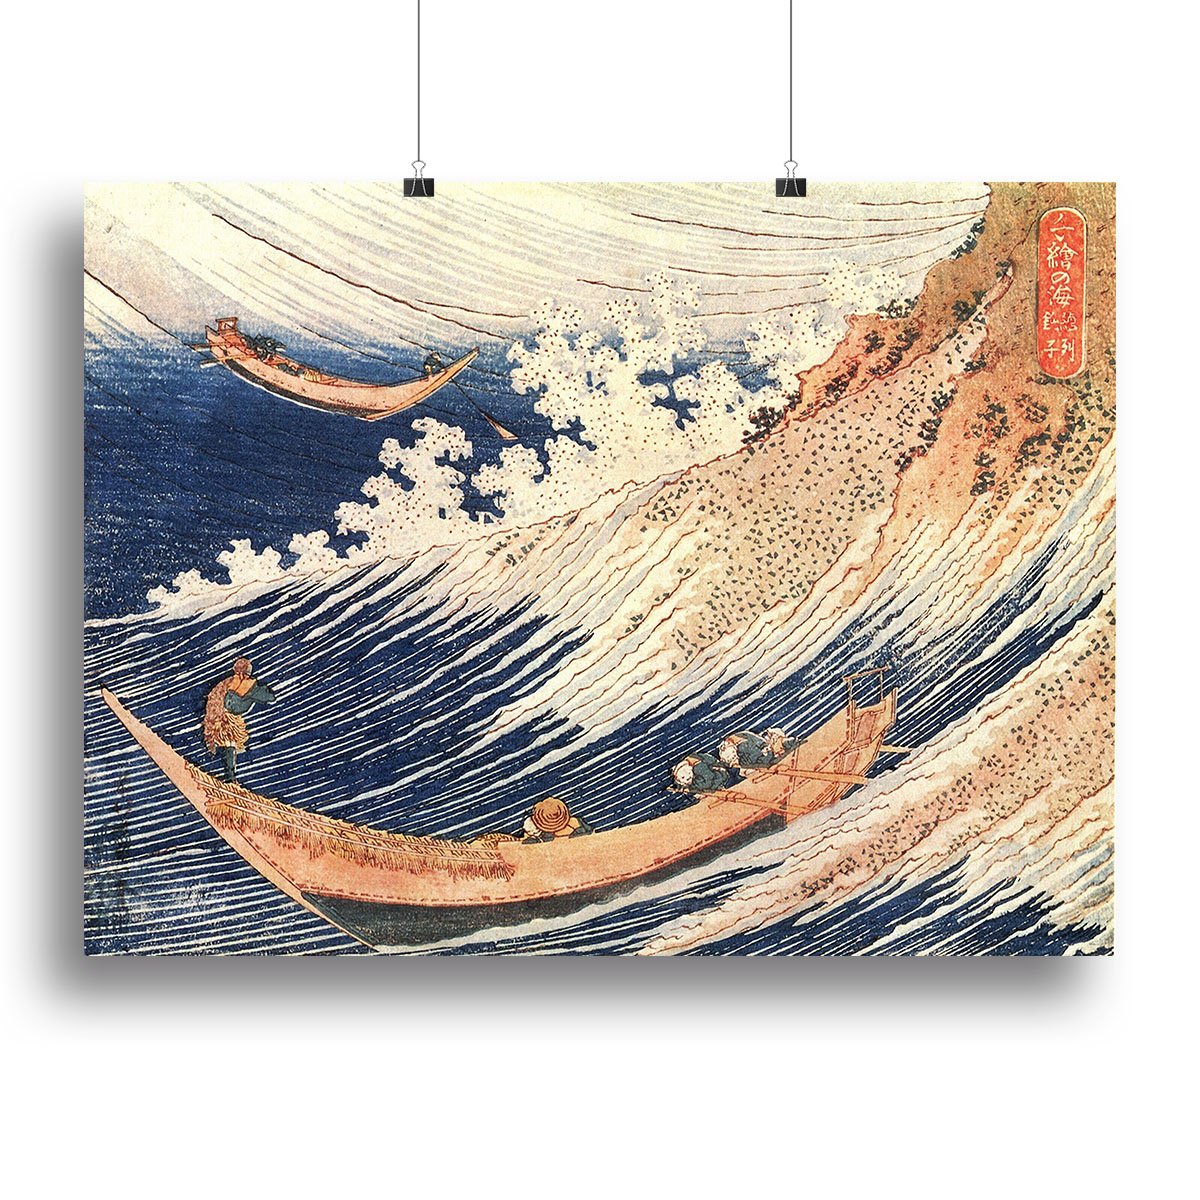 A Wild Sea at Choshi by Hokusai Canvas Print or Poster